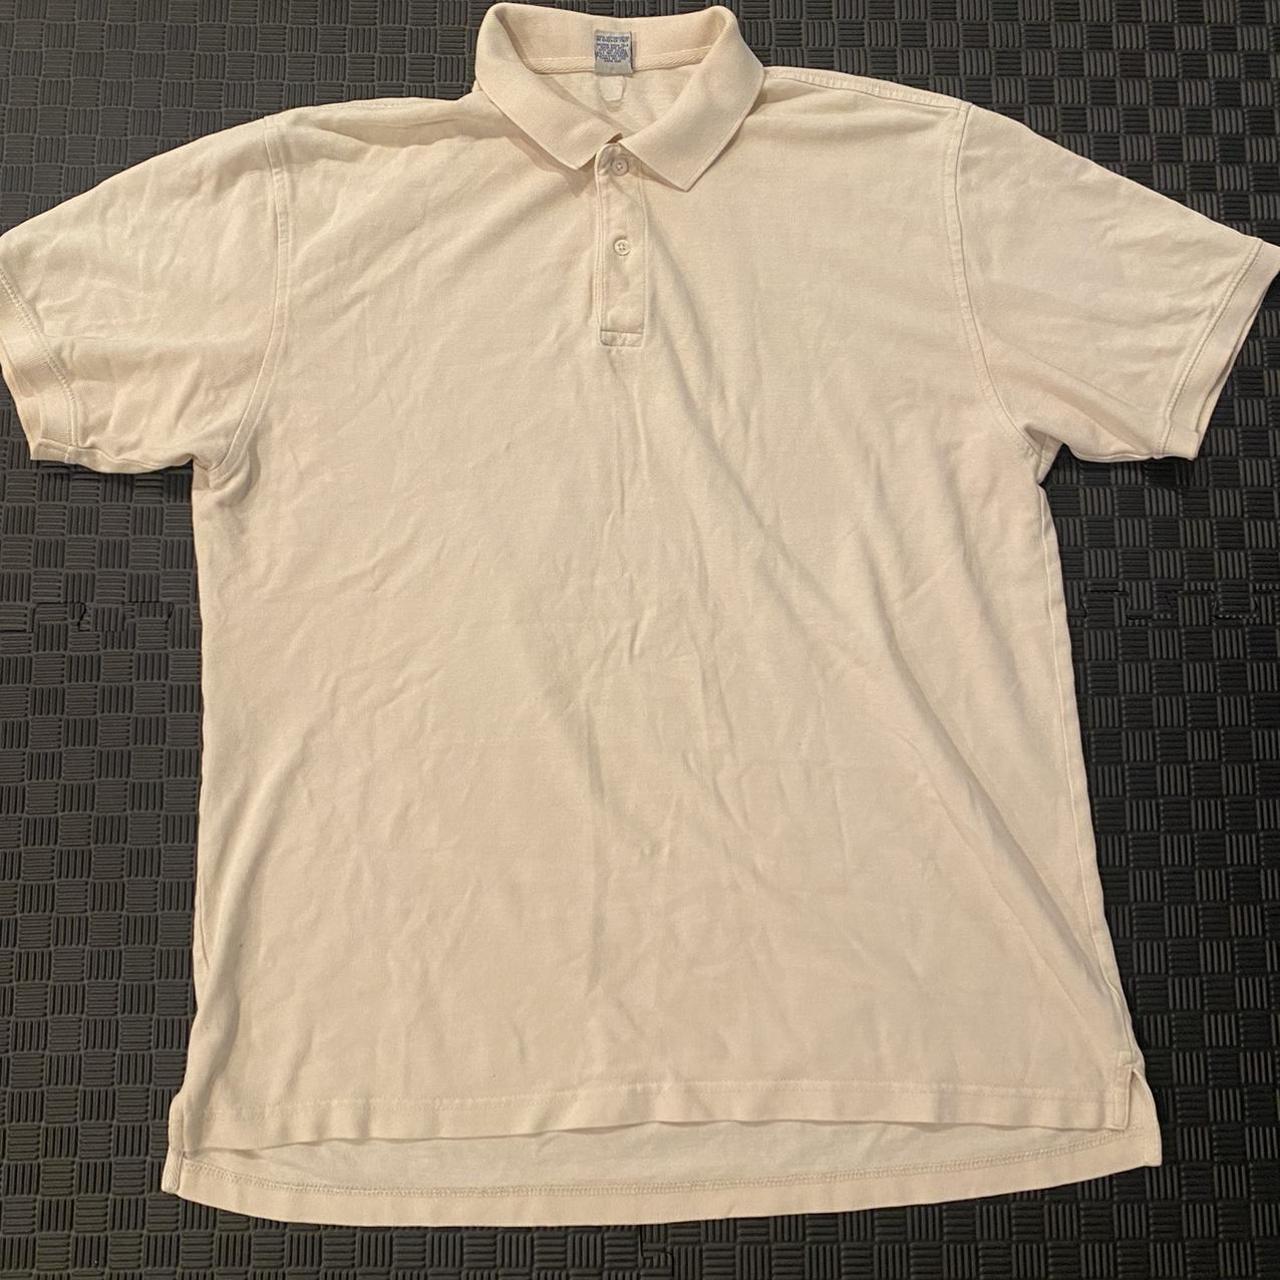 Old Navy Men's Cream and Tan Polo-shirts | Depop